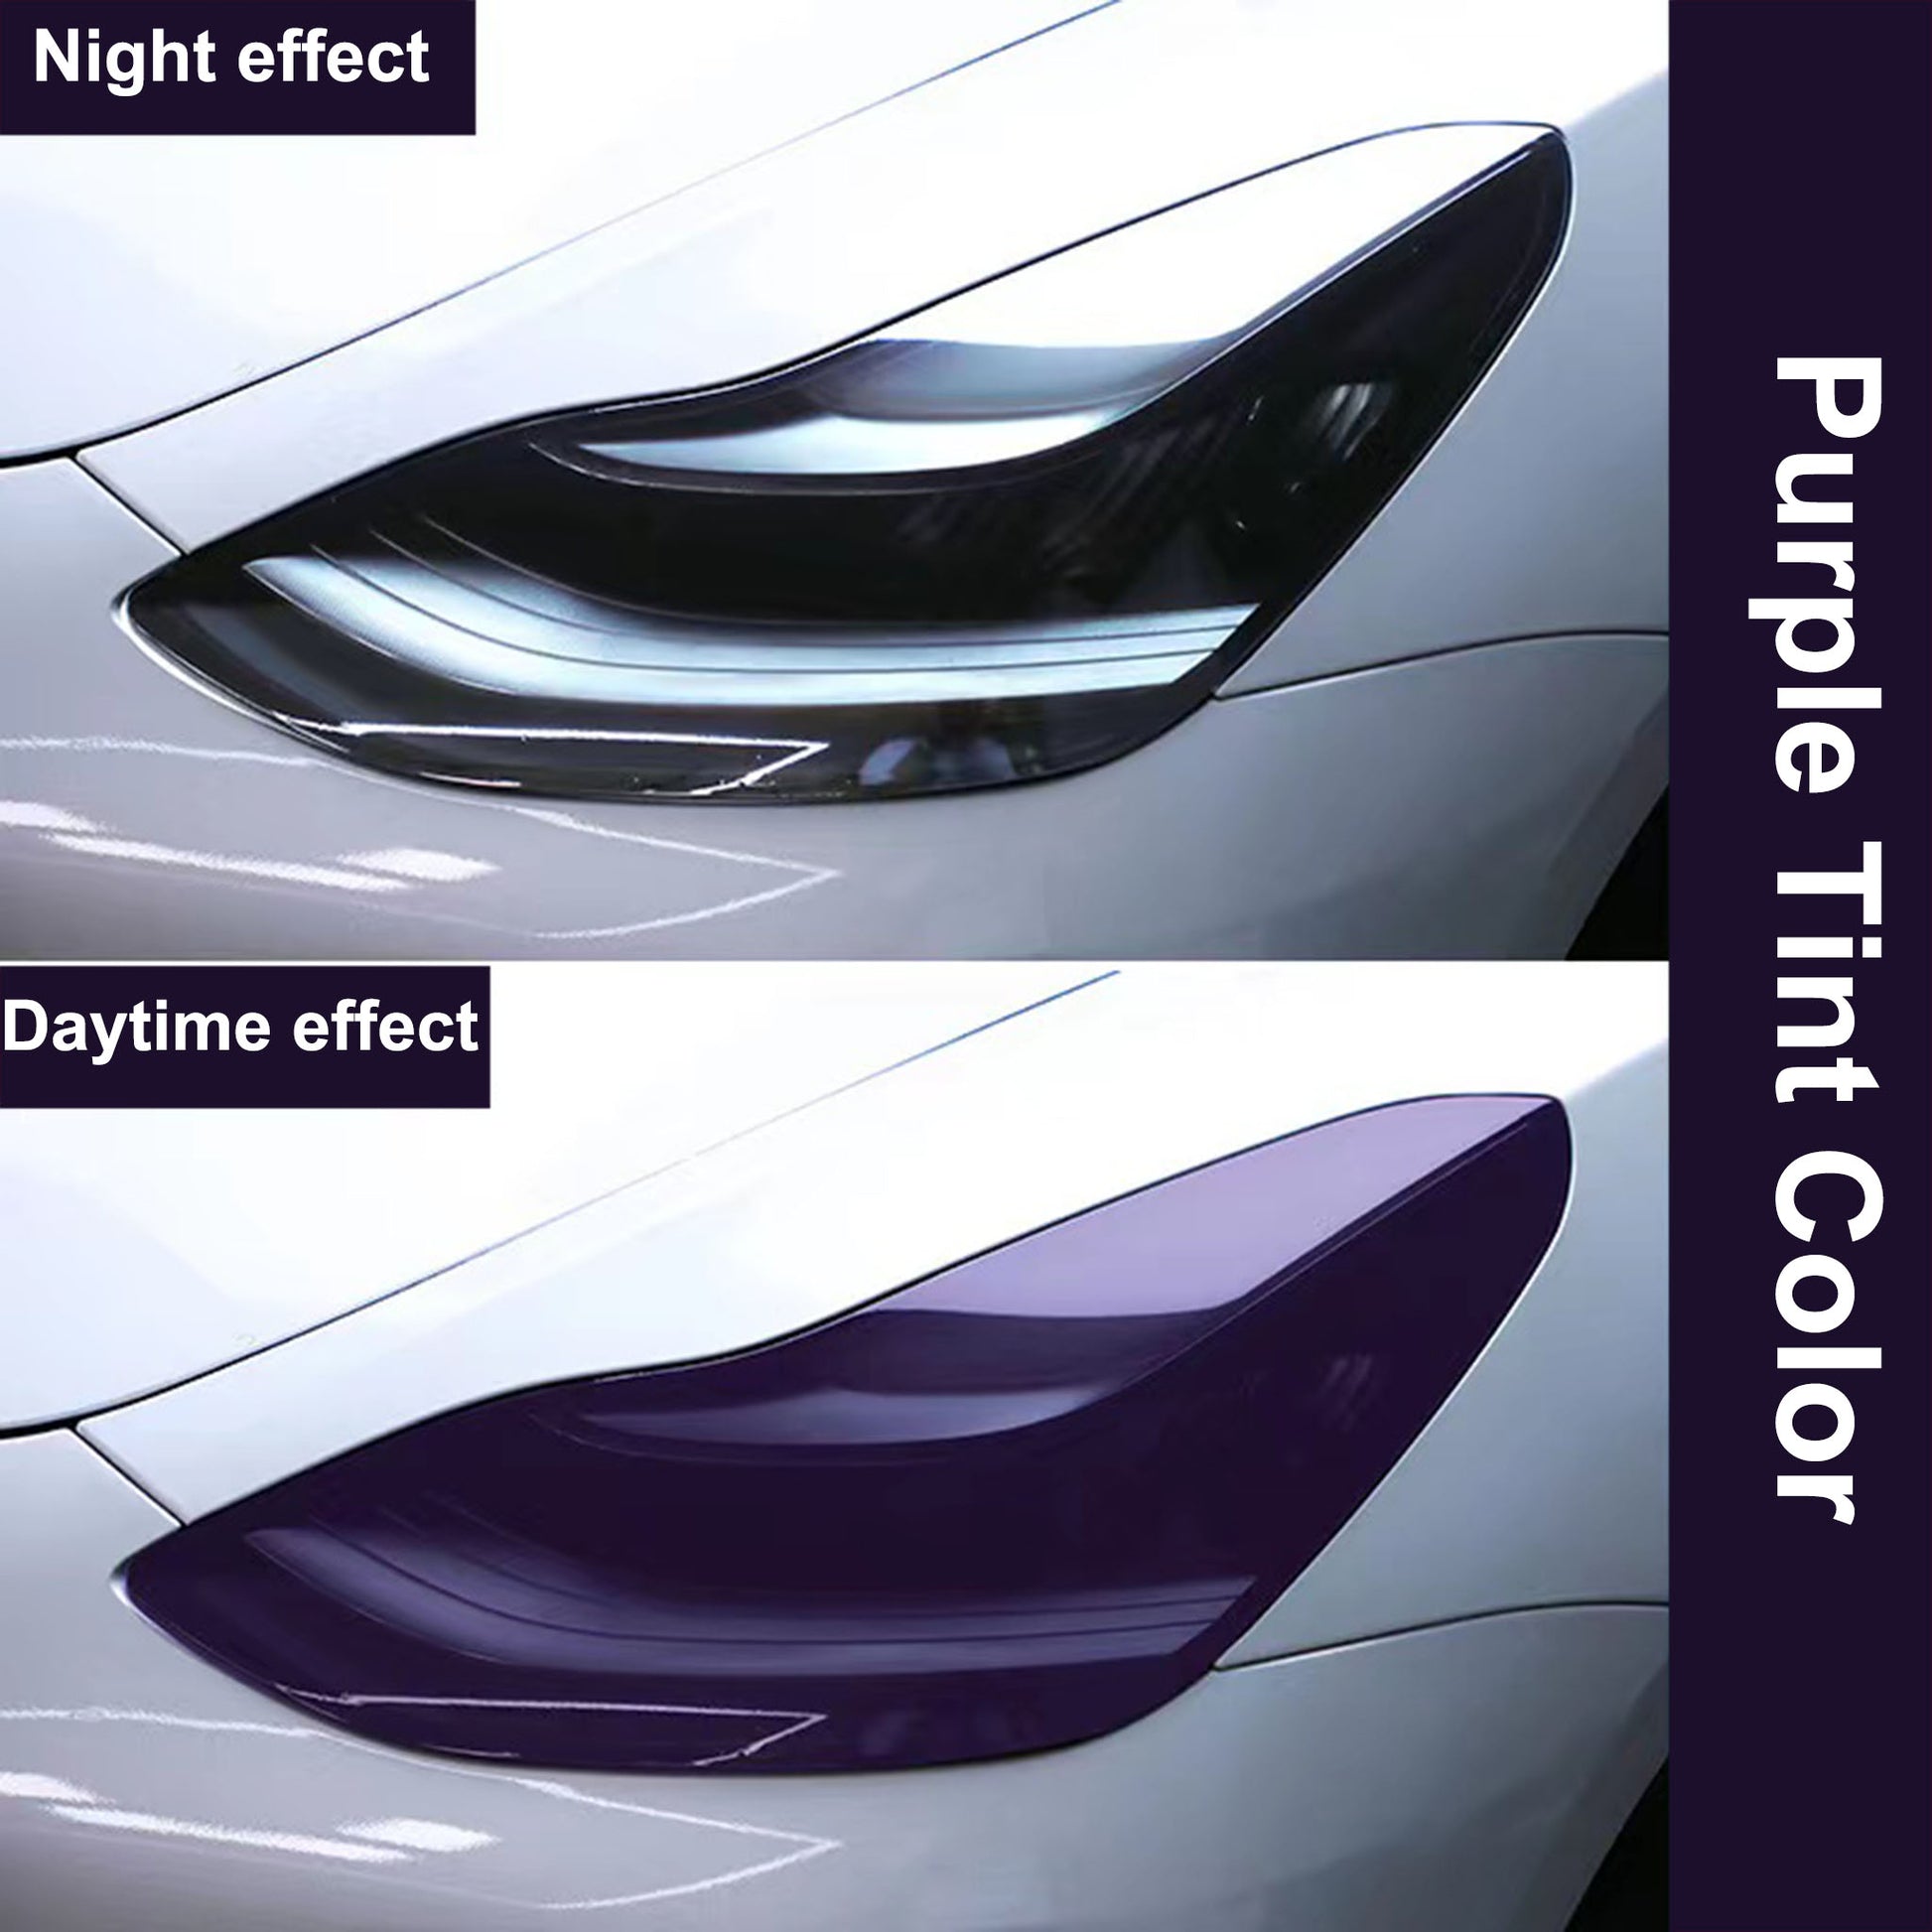 Best Headlight Film Protection Cover for Tesla Model 3/Y/S/X – Yeslak